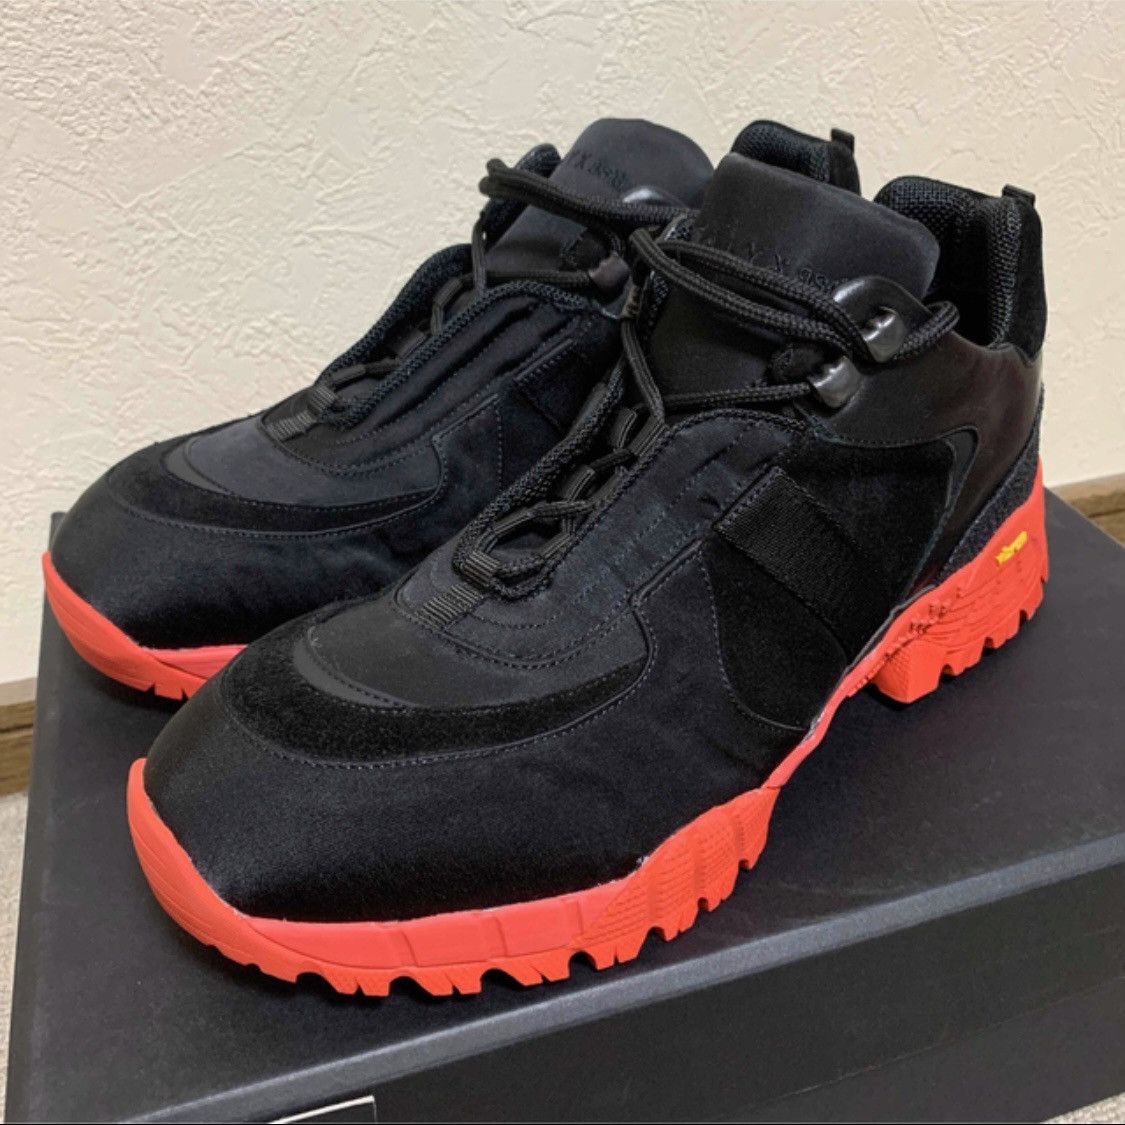 Alyx 1017 ALYX 9SM Low Hiking boot | Grailed